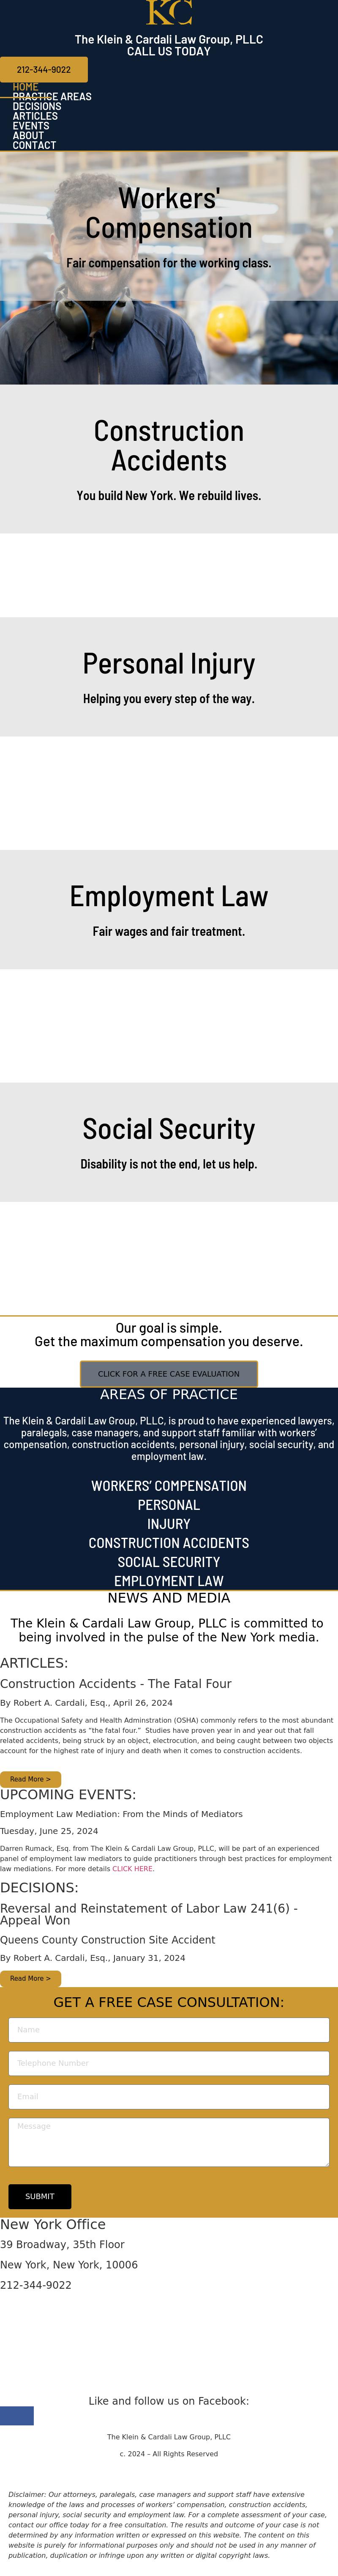 The Klein Law Group, P.C. - New York NY Lawyers